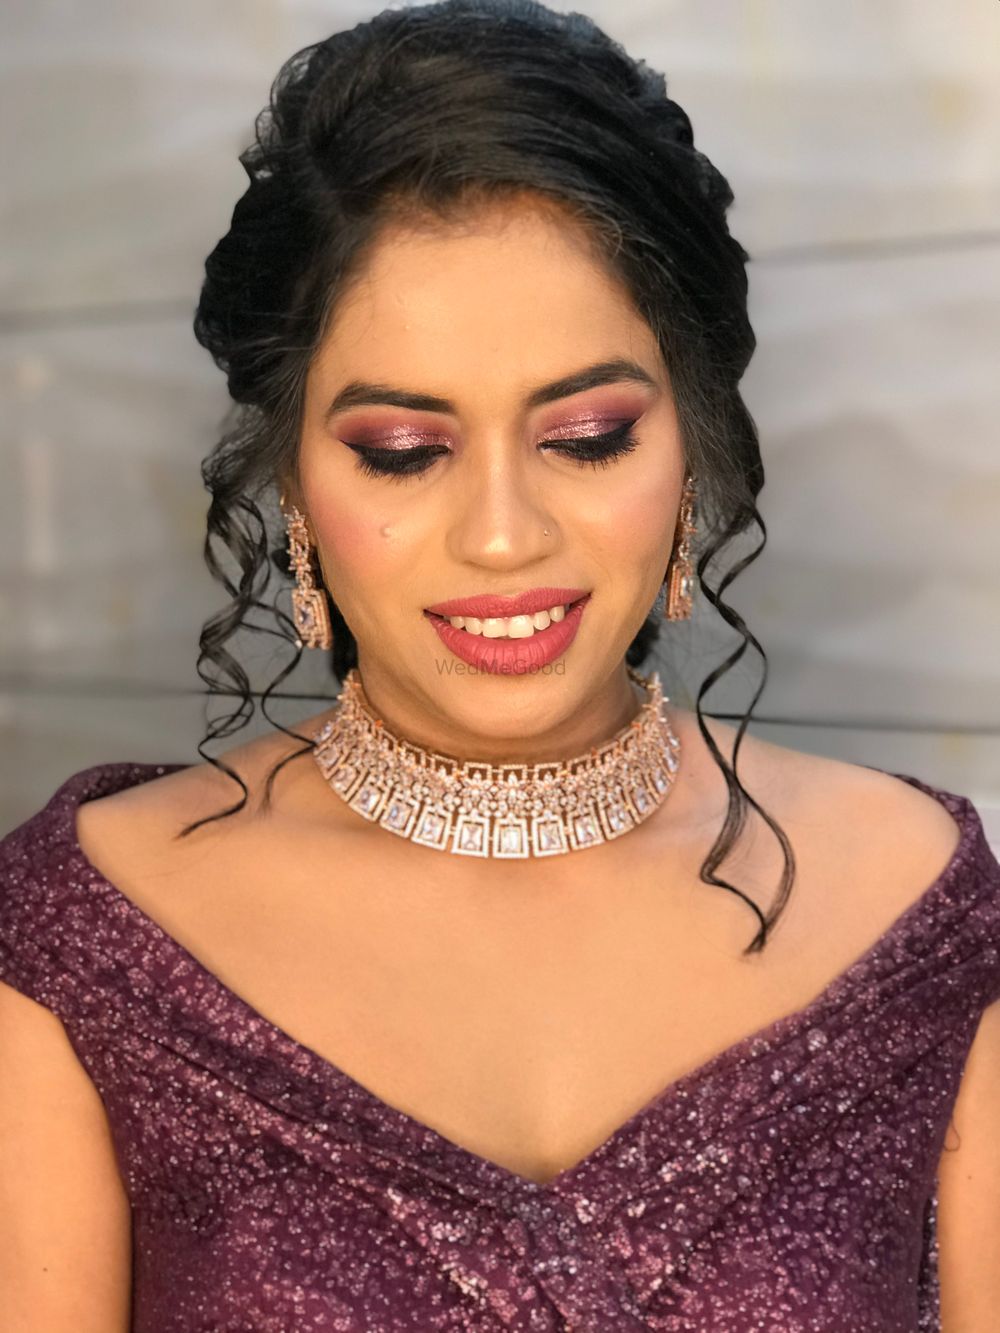 Photo From Engagement bride - By Makeup by Sakshi